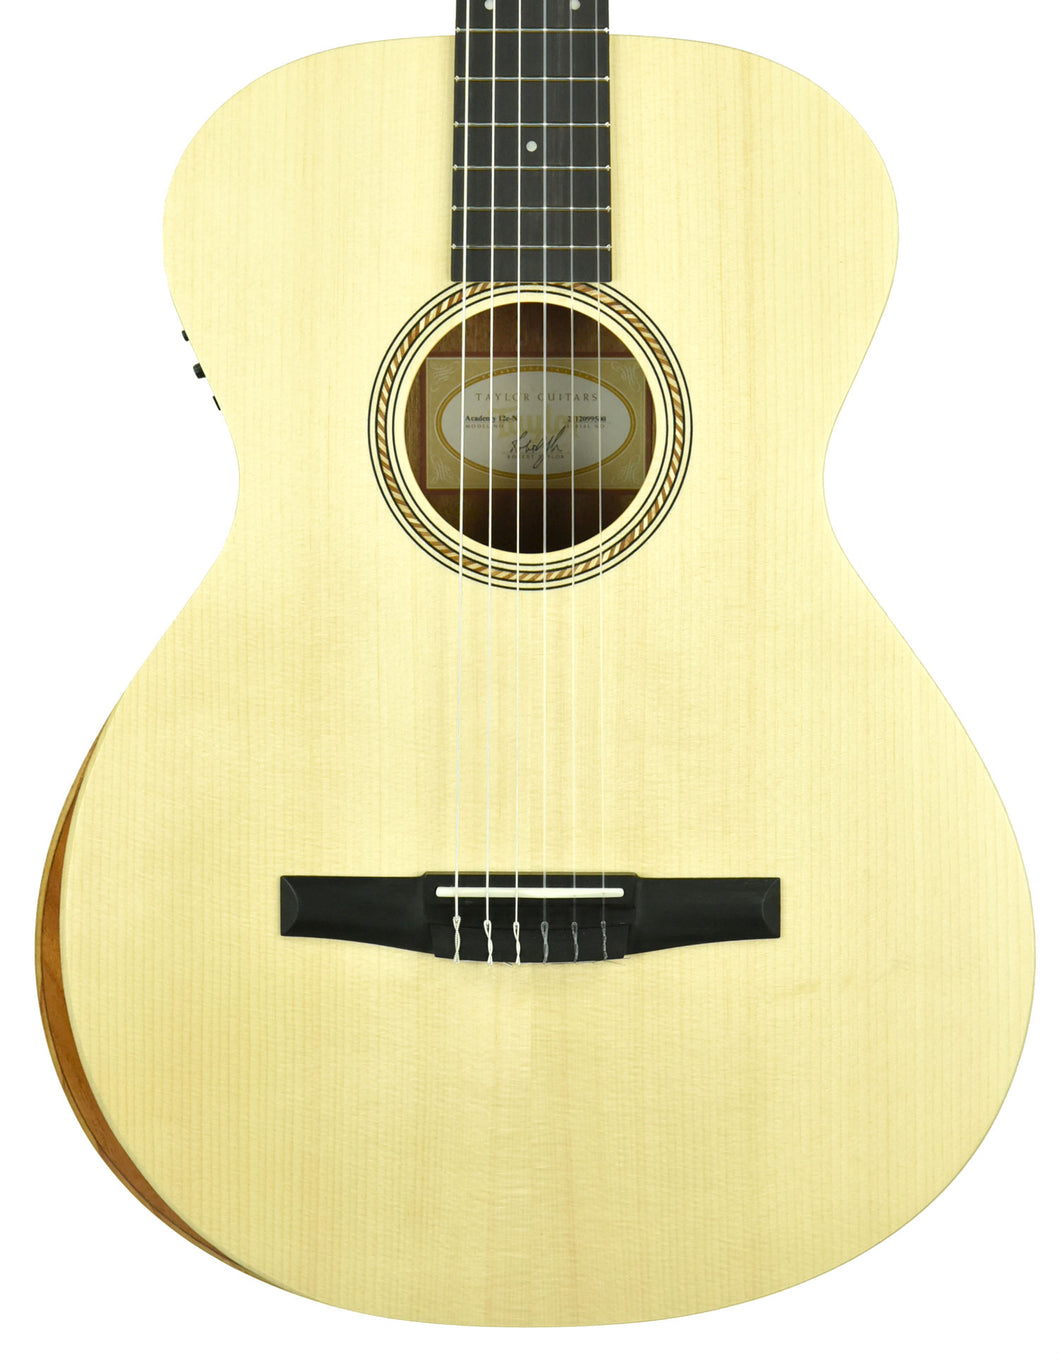 Taylor Academy 12e-N Nylon Acoustic Guitar in Natural 2112099500 - The Music Gallery